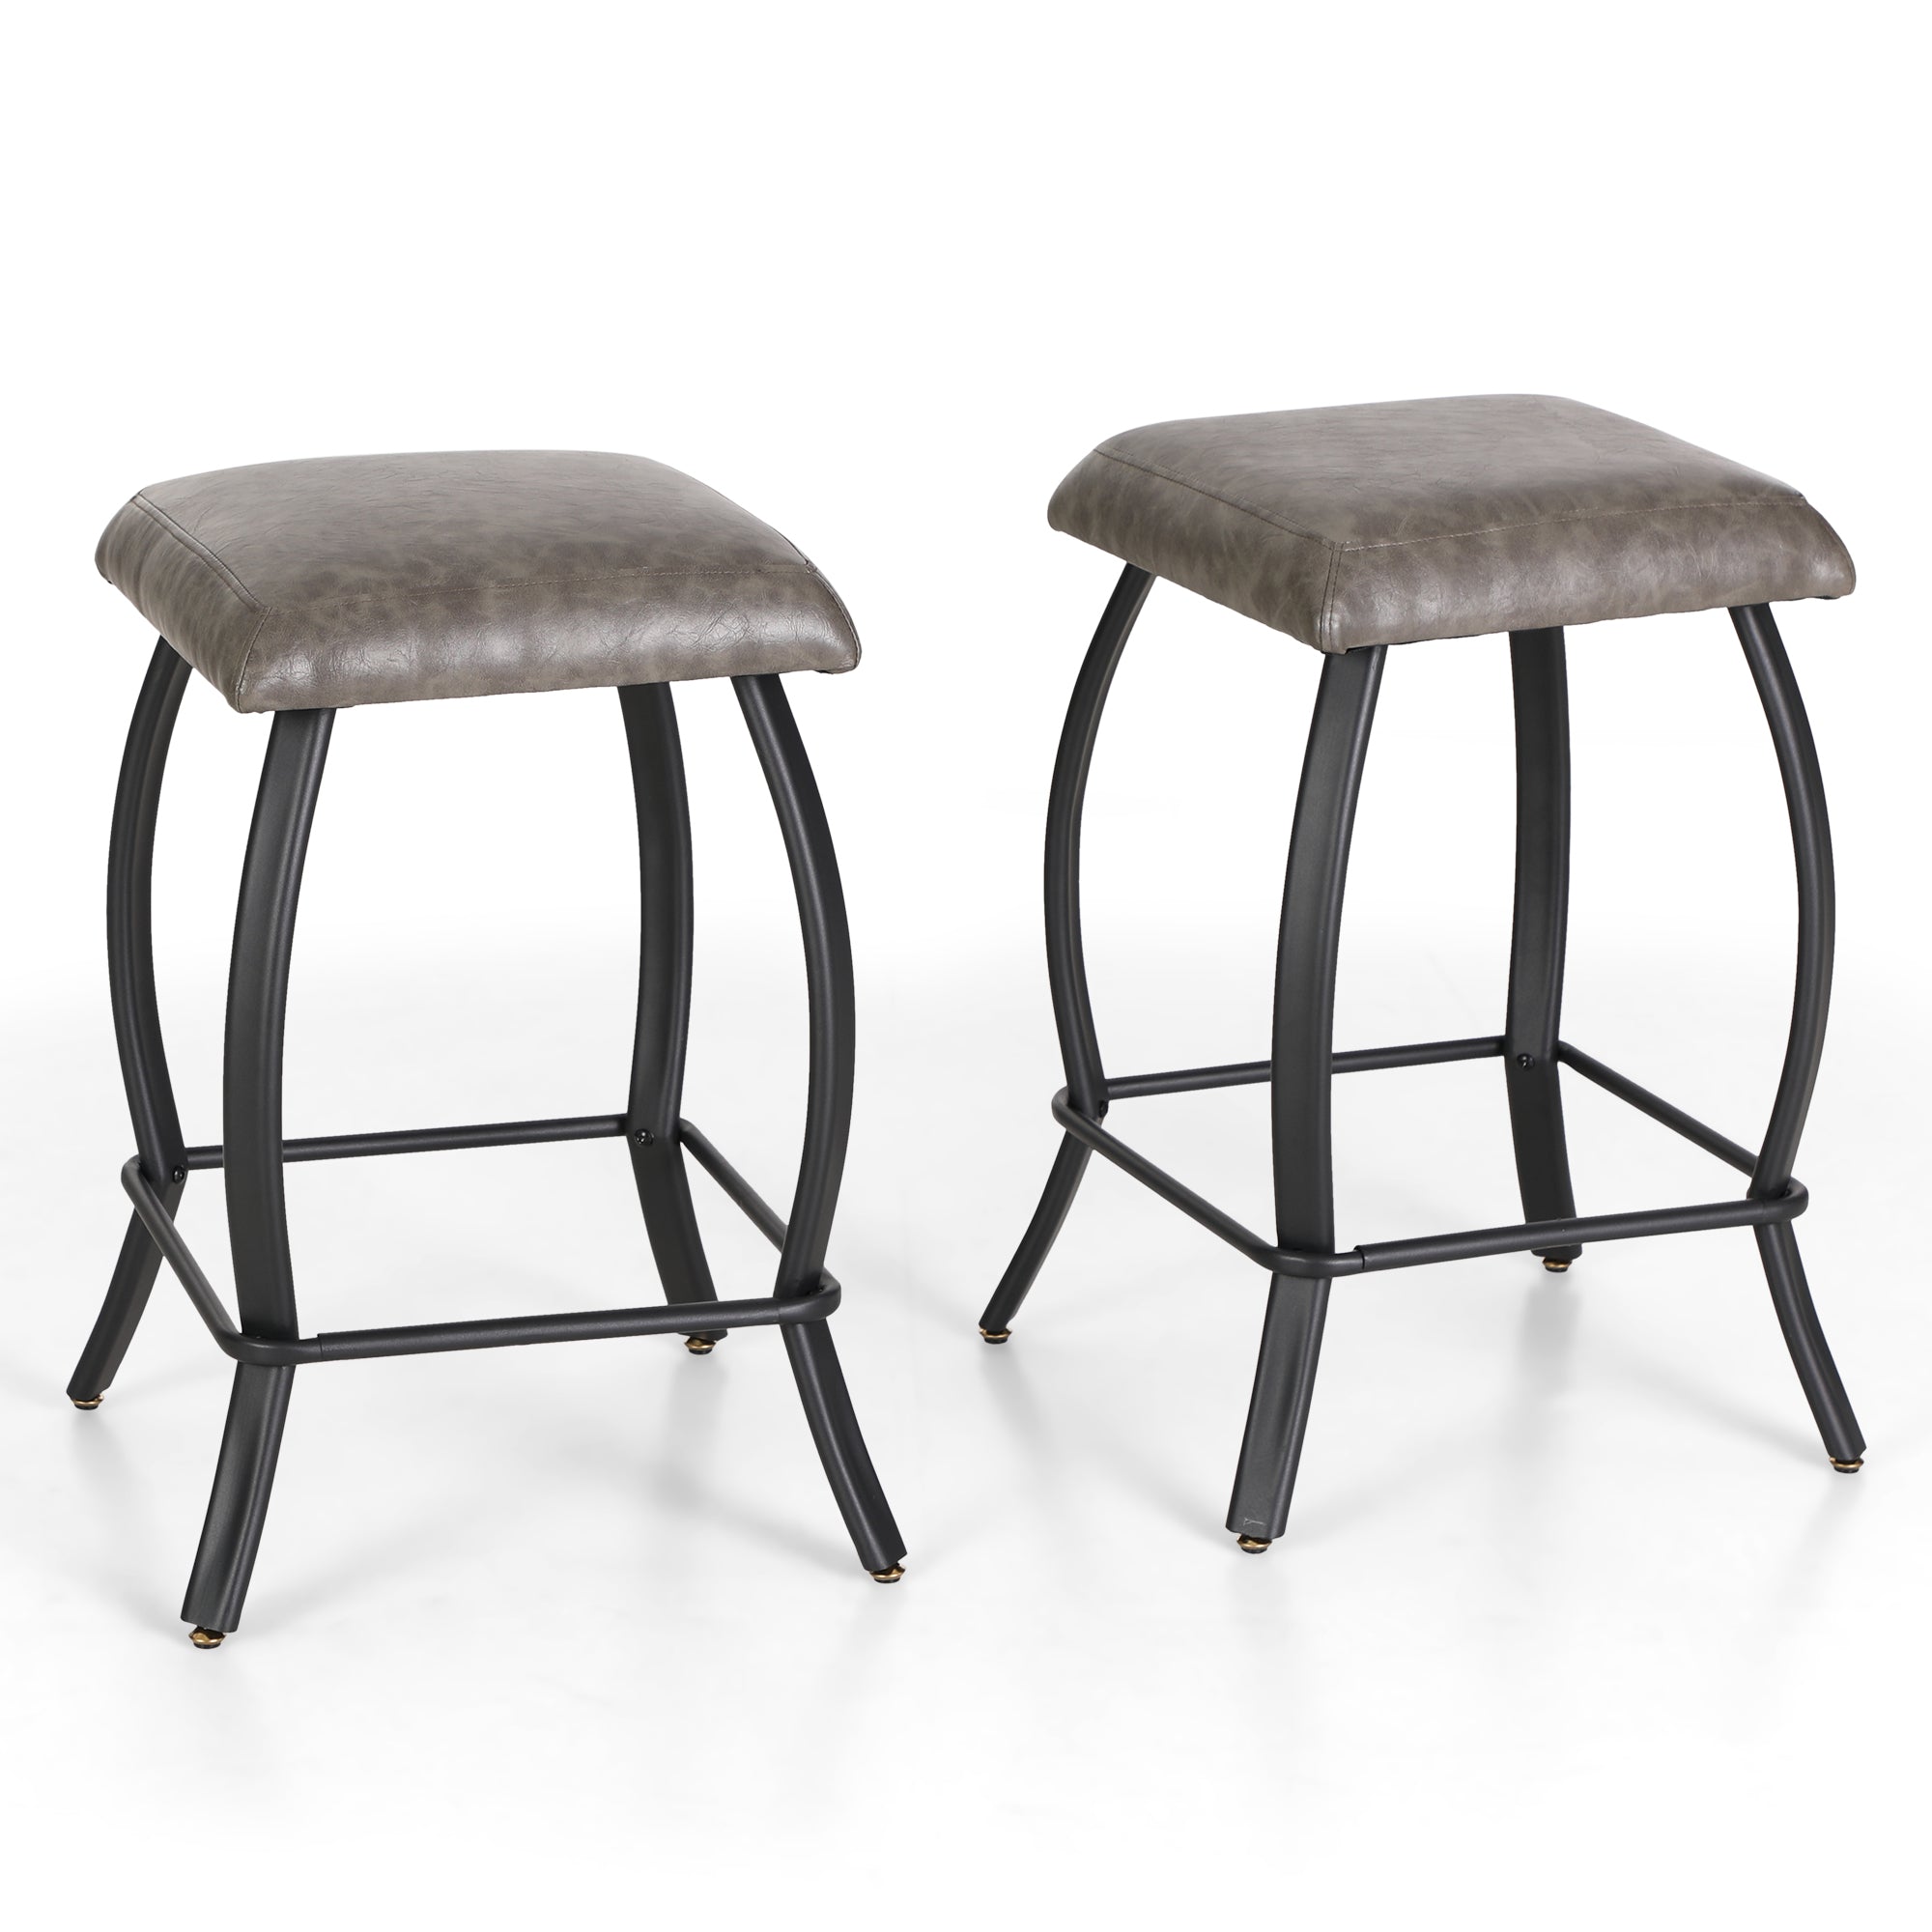 PHI VILLA Square Swivel Seating Bar Stools with Curved Metal Frame, Set of 2